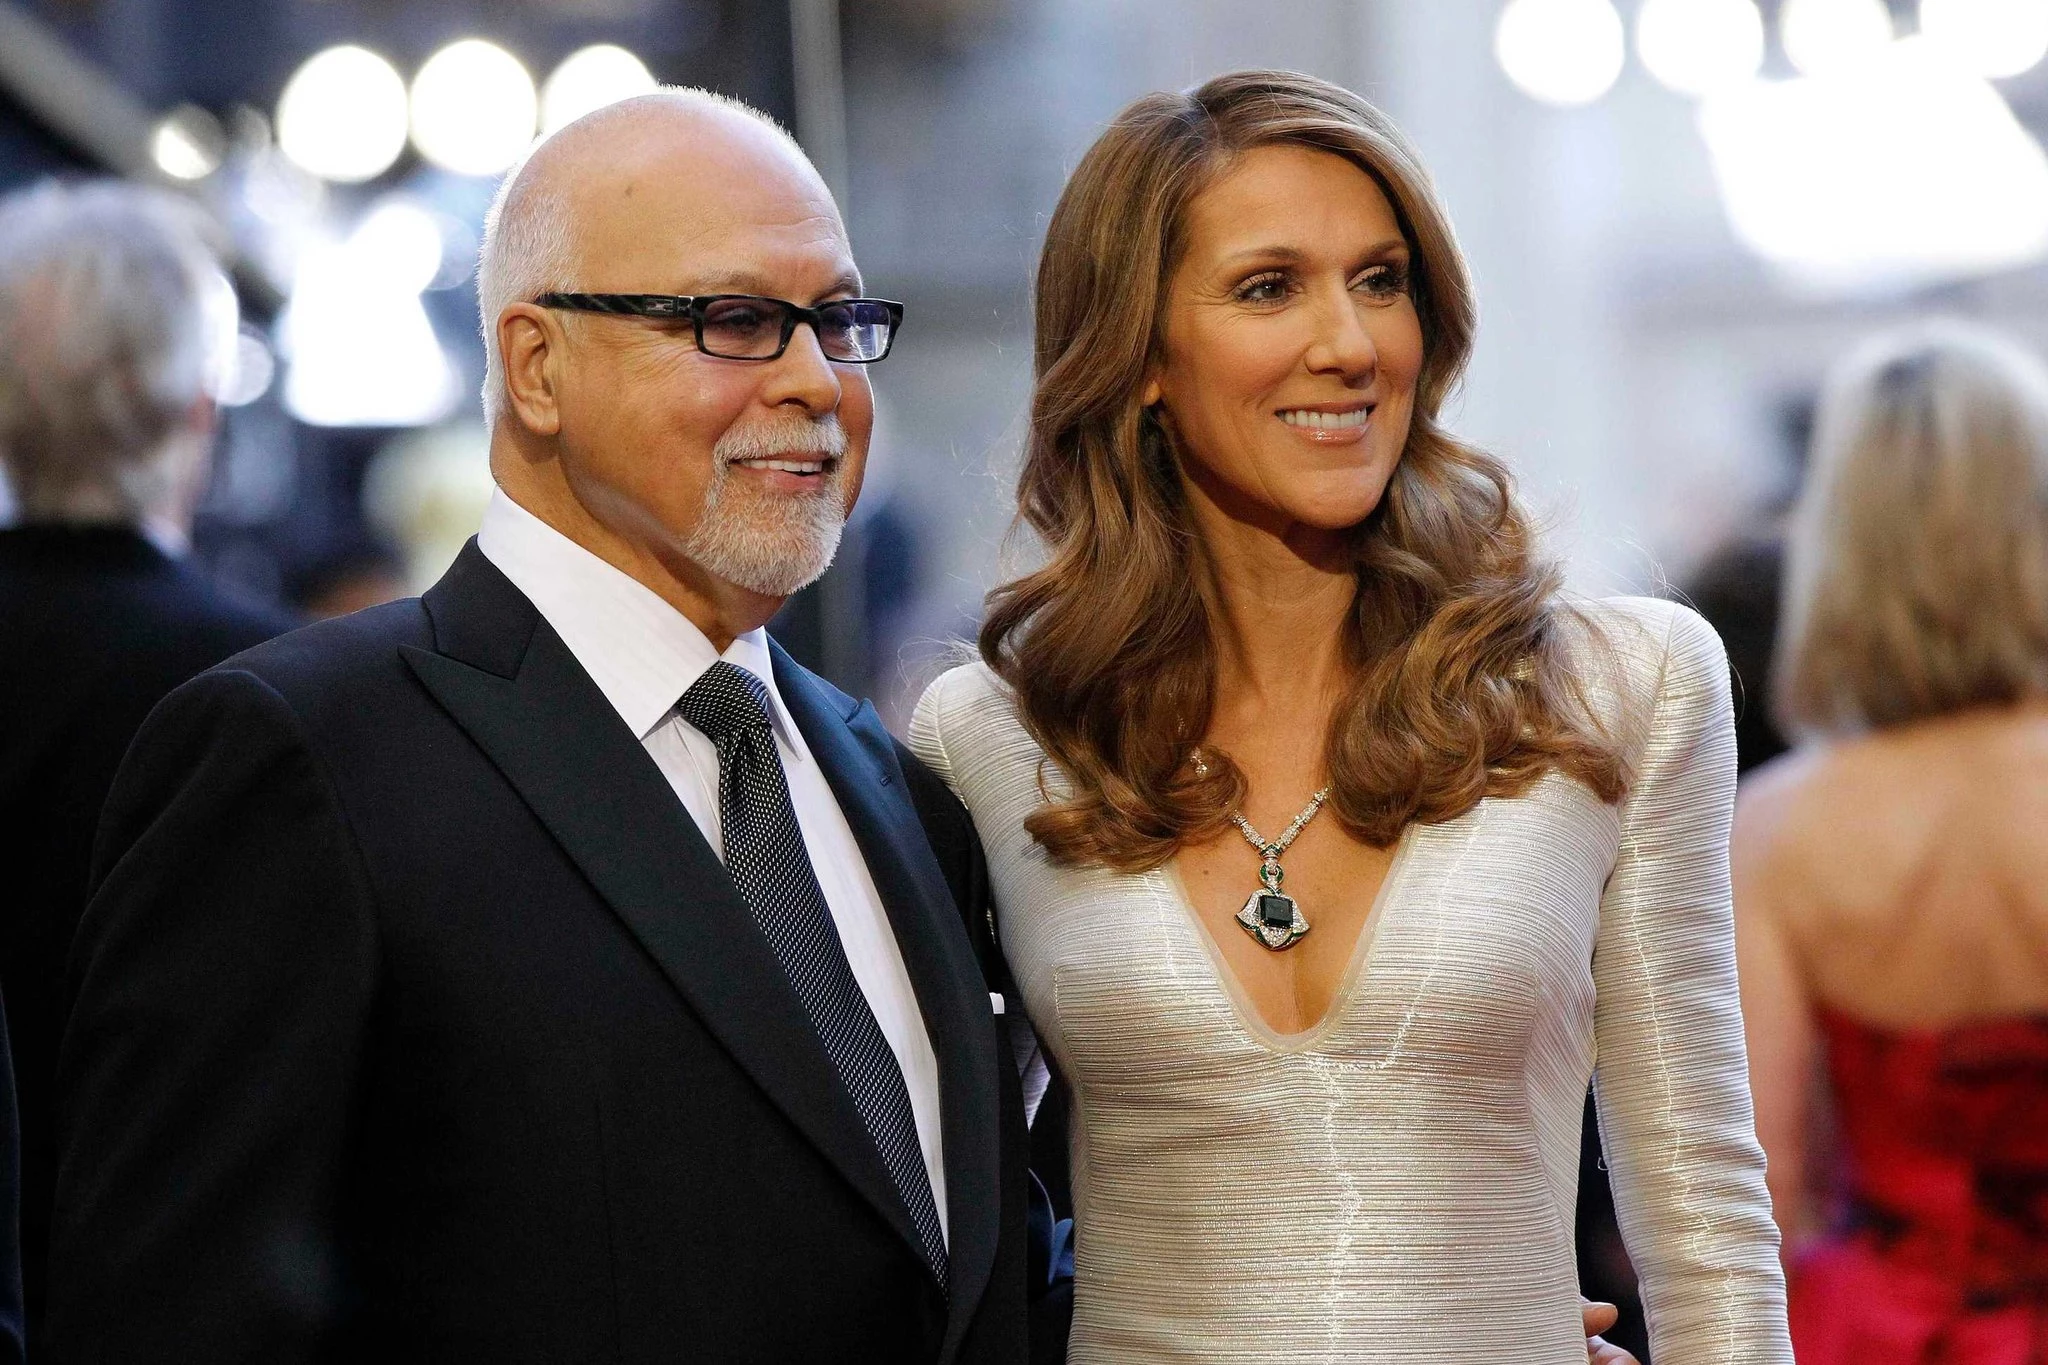 who is celine dion?